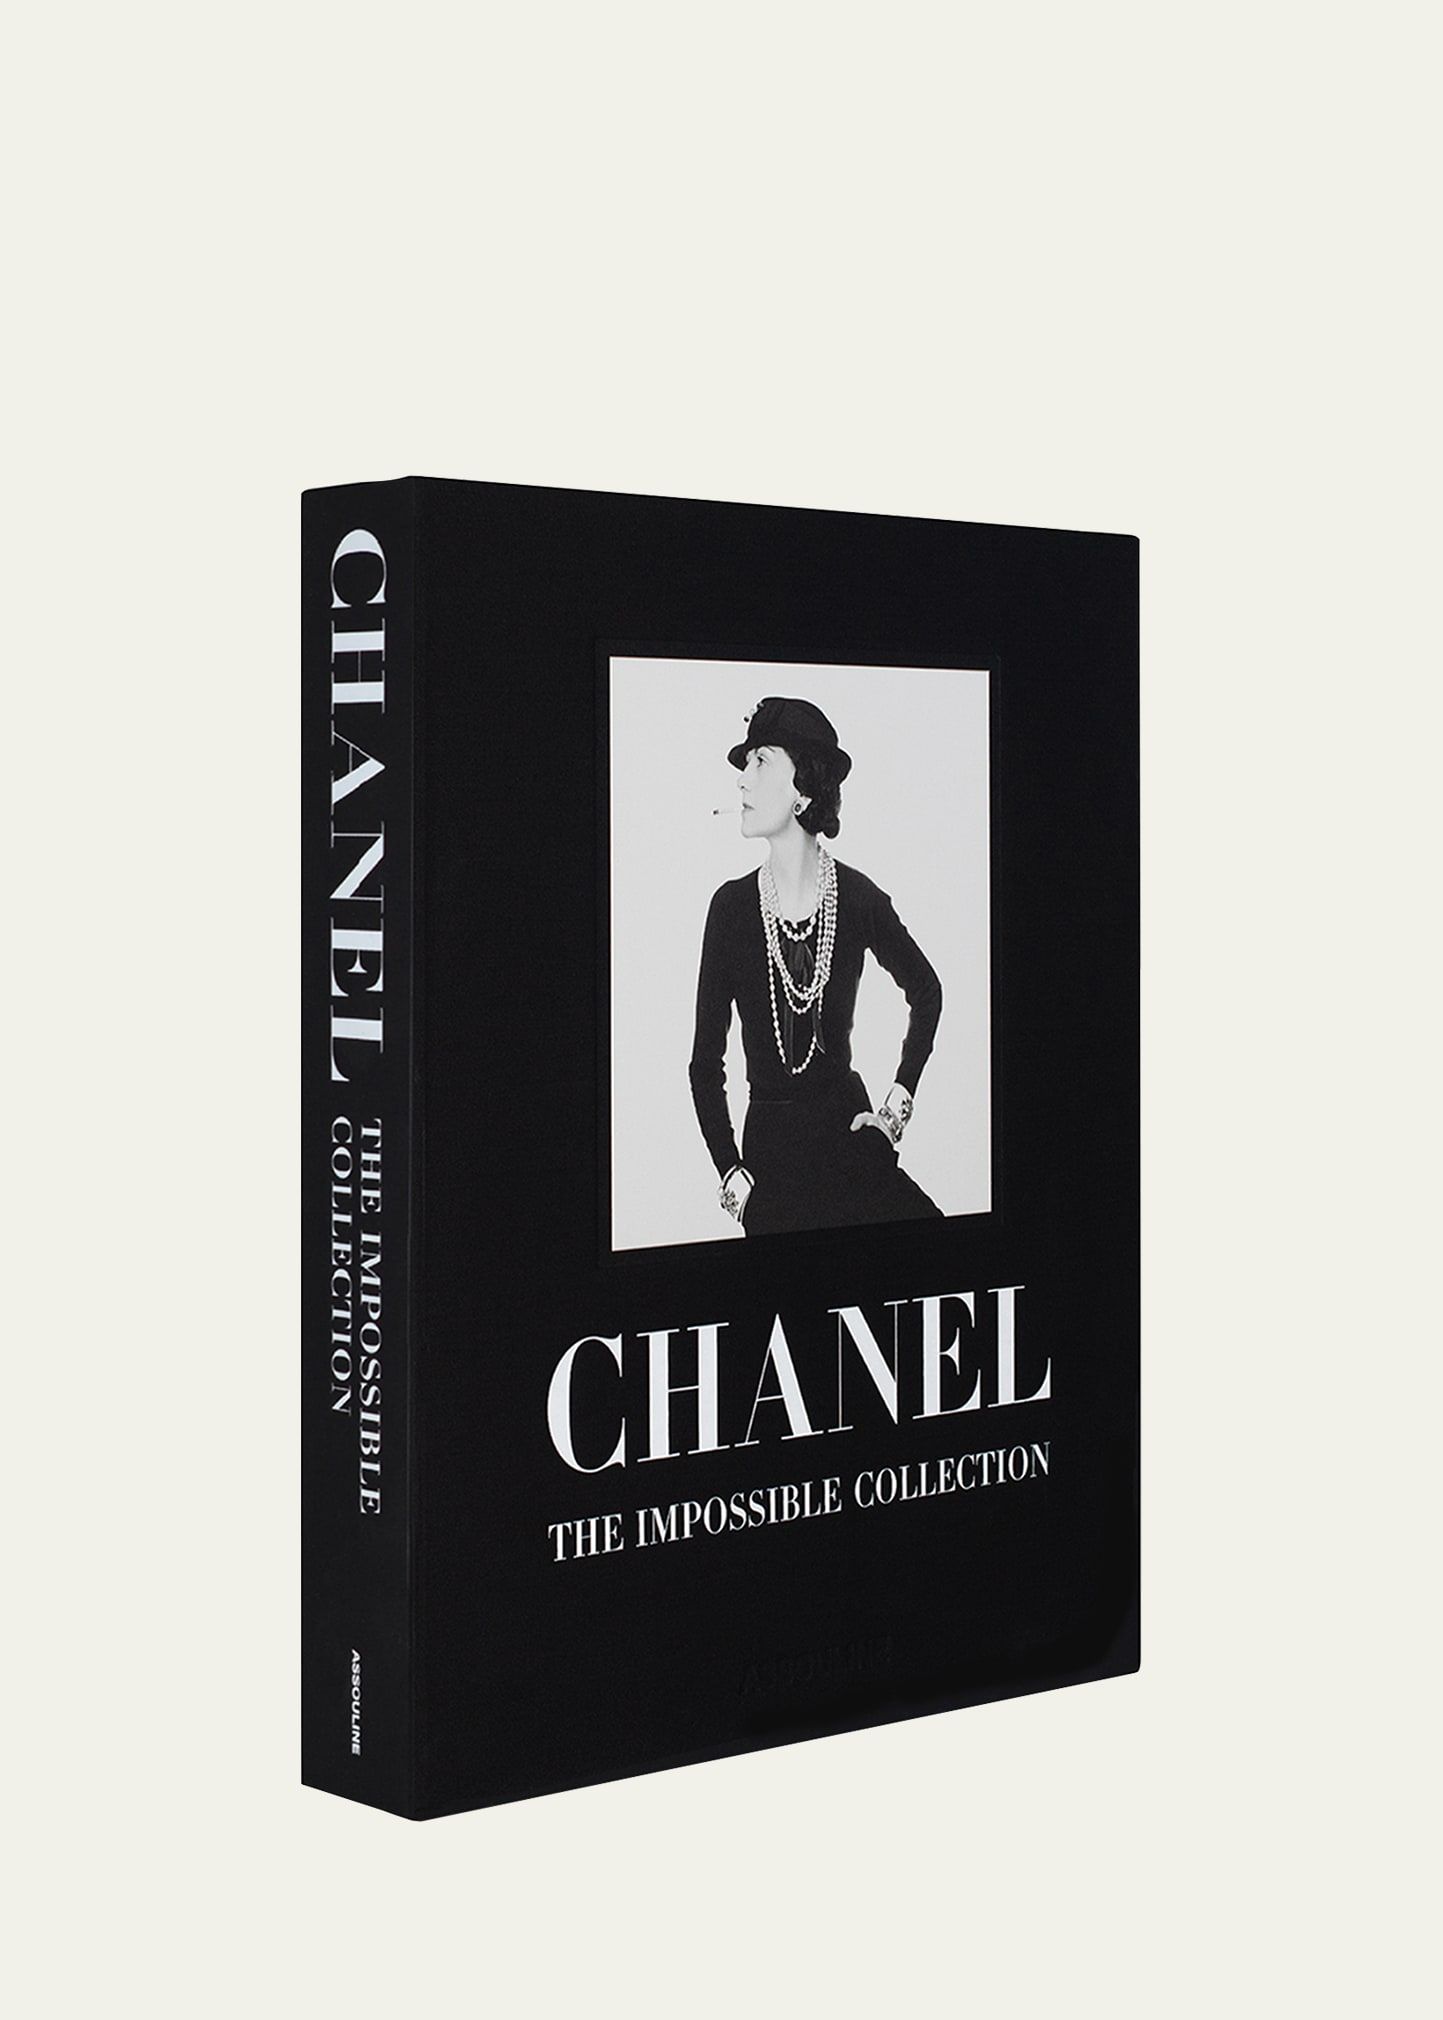 Chanel: The Impossible Collection" Book by Alexander Fury | Bergdorf Goodman